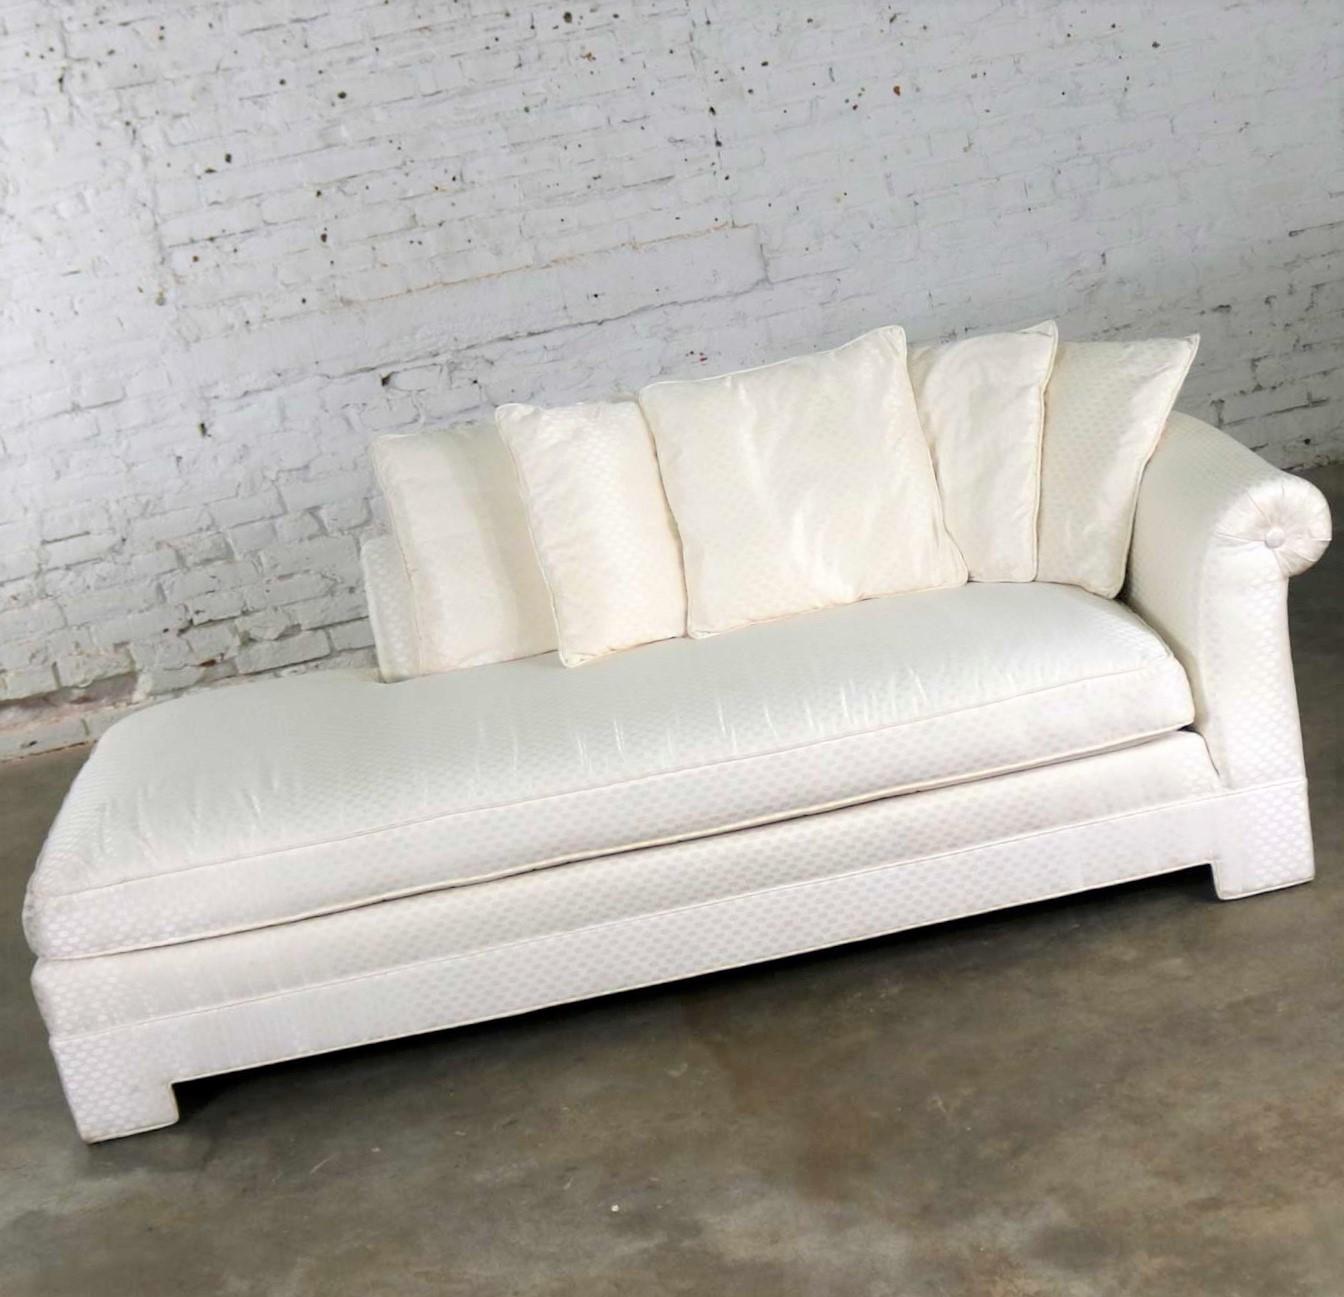 Elegant vintage chaise lounge in an Art Deco or Hollywood Regency styling having loose pillows and a rolled single arm and back and covered in a white jacquard checked upholstery fabric. It is in wonderful overall condition. Structurally solid and